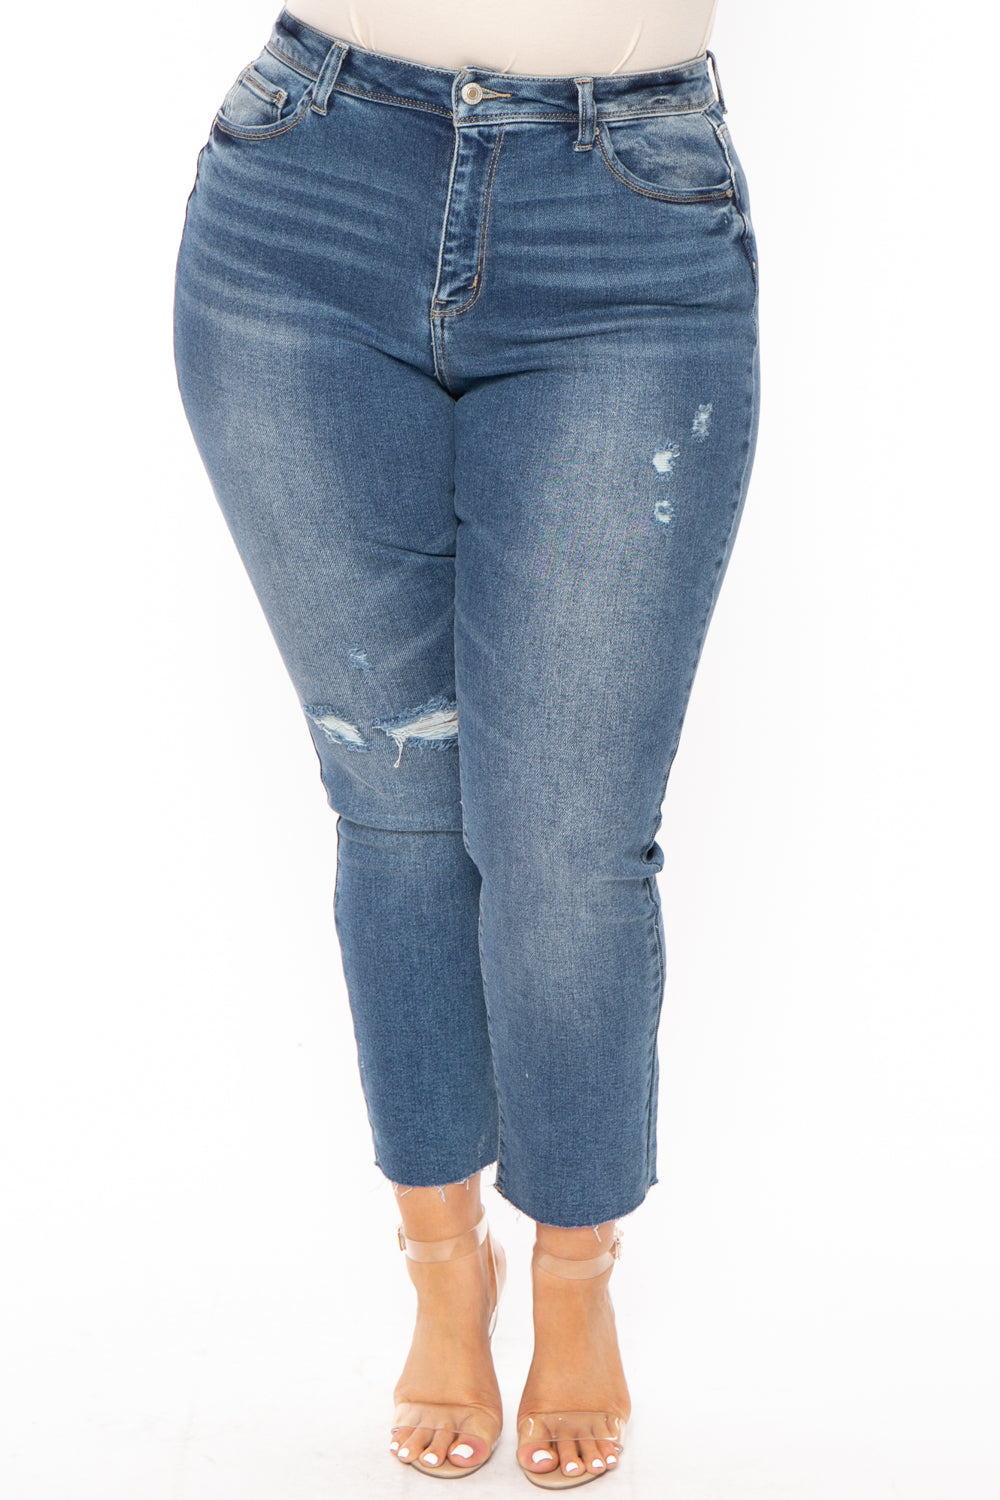 Buy Infinite Fit High Rise Bootcut Jeans Plus Size for USD 44.00